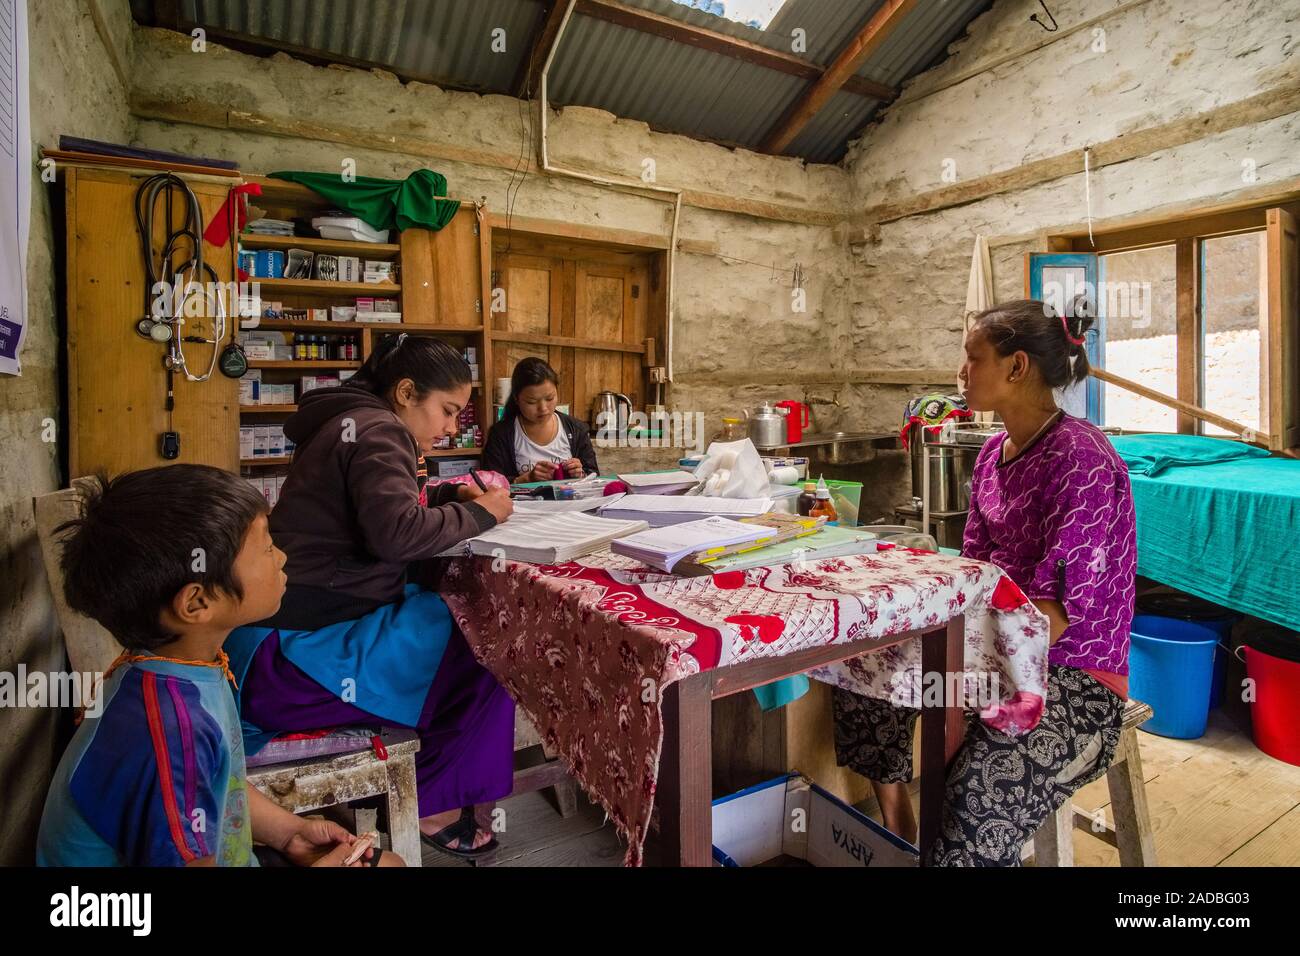 A femal doctor is practising in the medical station of the village, two patients waiting for treatment Stock Photo